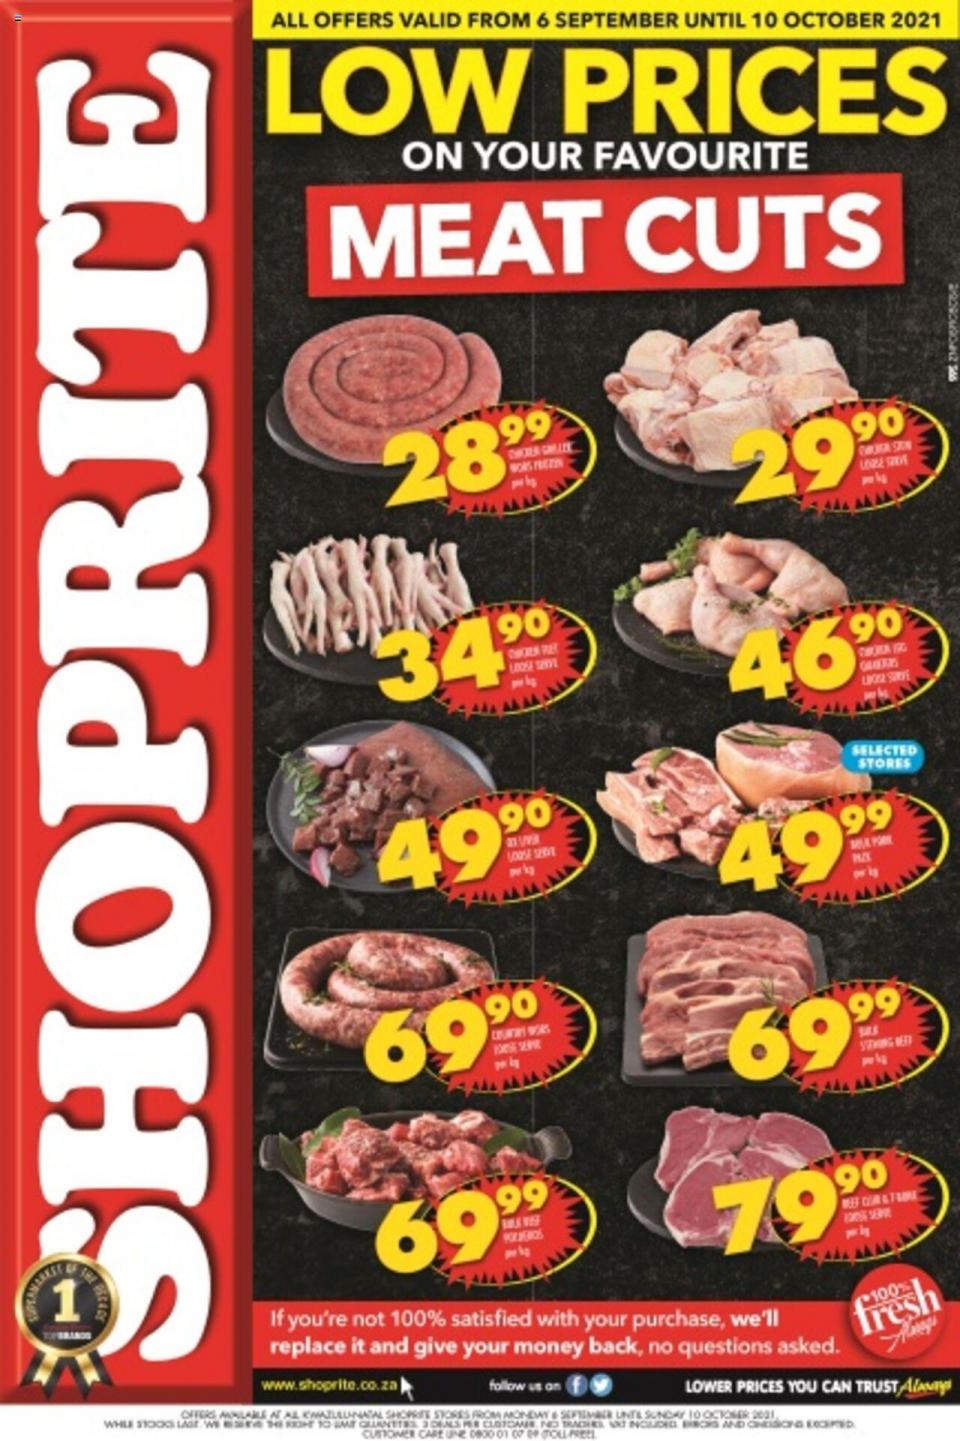 Shoprite Specials Low Prices On Meat Cuts 6 Sep – 10 Oct 2021